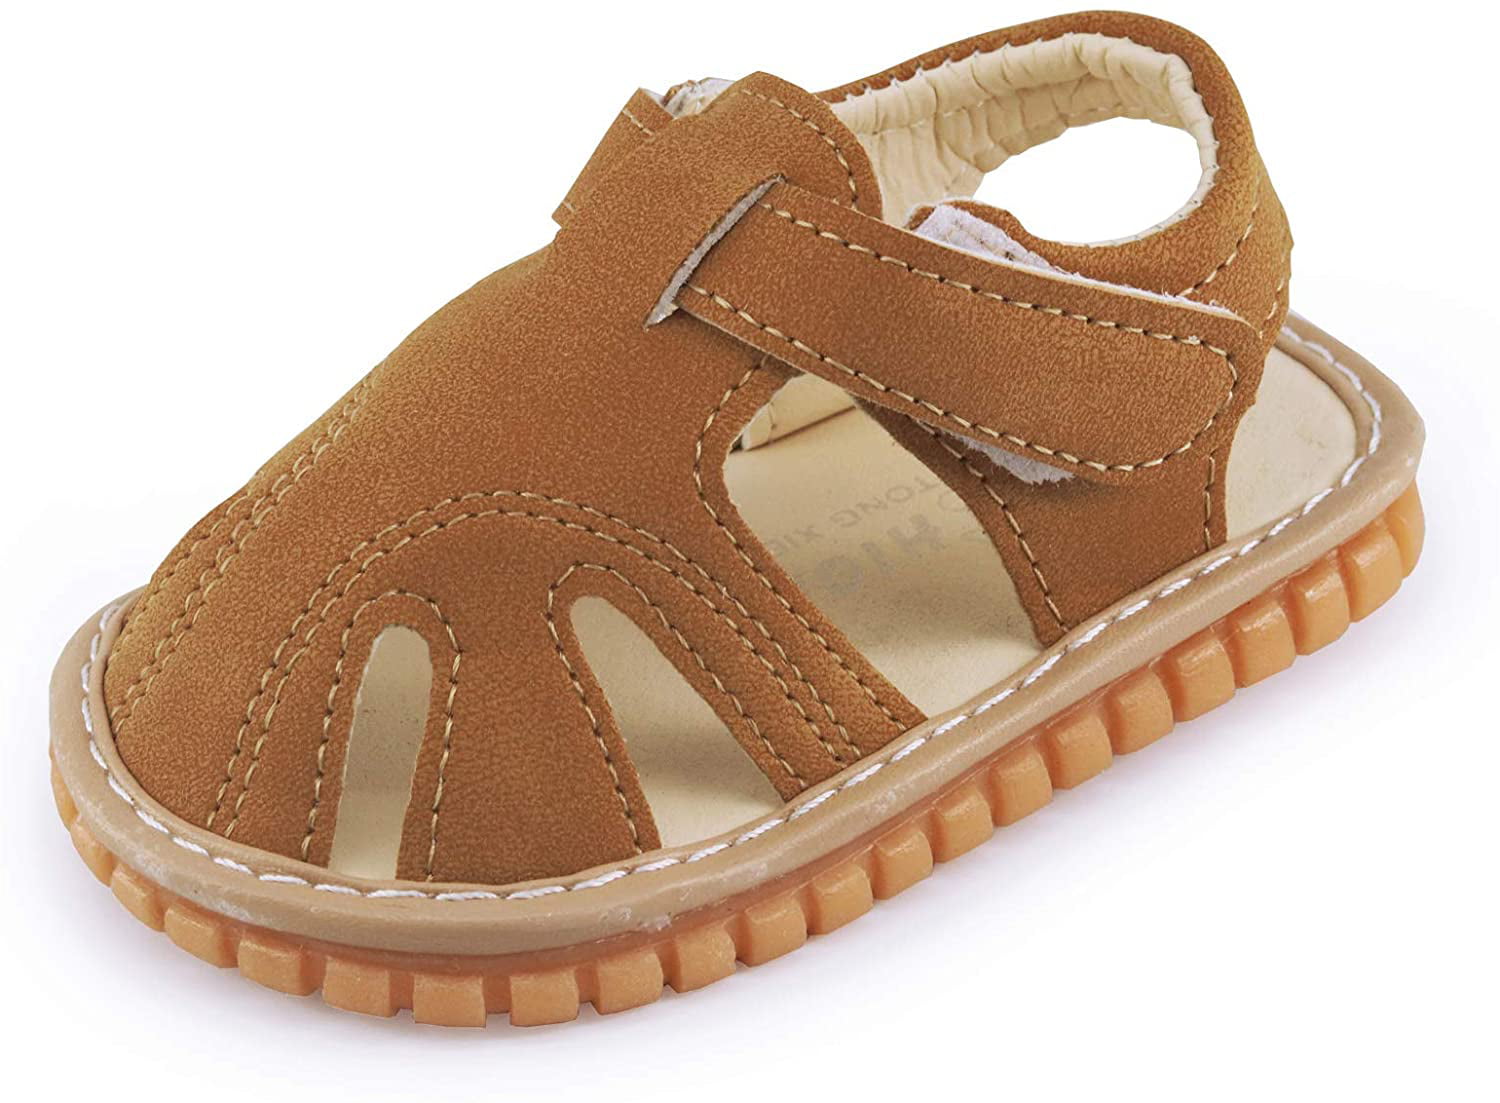 Baby Boys Girls Summer Sandals Closed-Toe Infant Soft Rubber Sole Outdoor Walking Shoes for Toddler First Walkers 